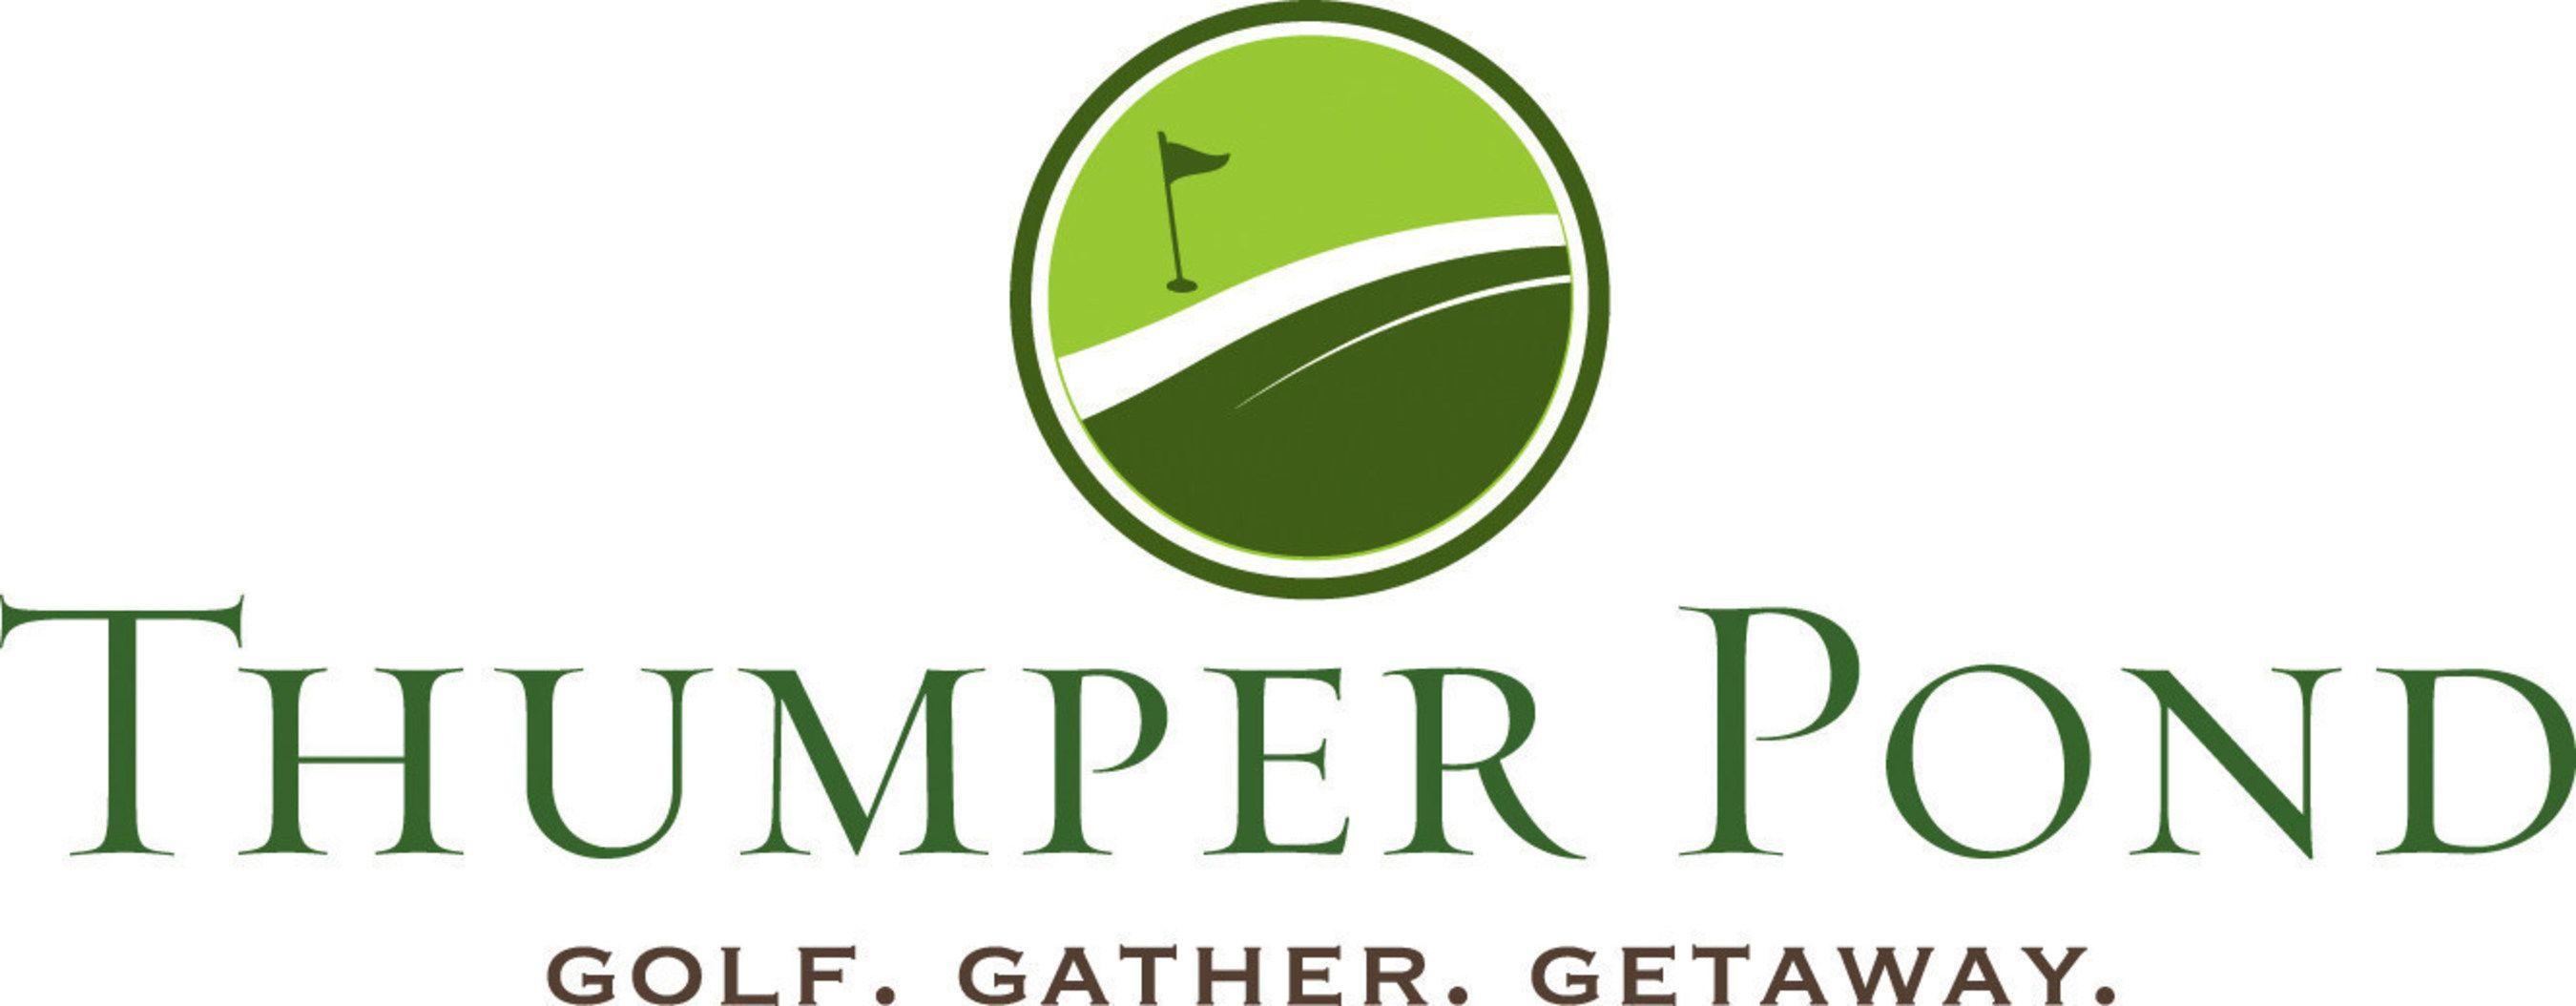 Thumper Logo - Thumper Pond Resort Water Park Reopens After Roof Collapsed 18